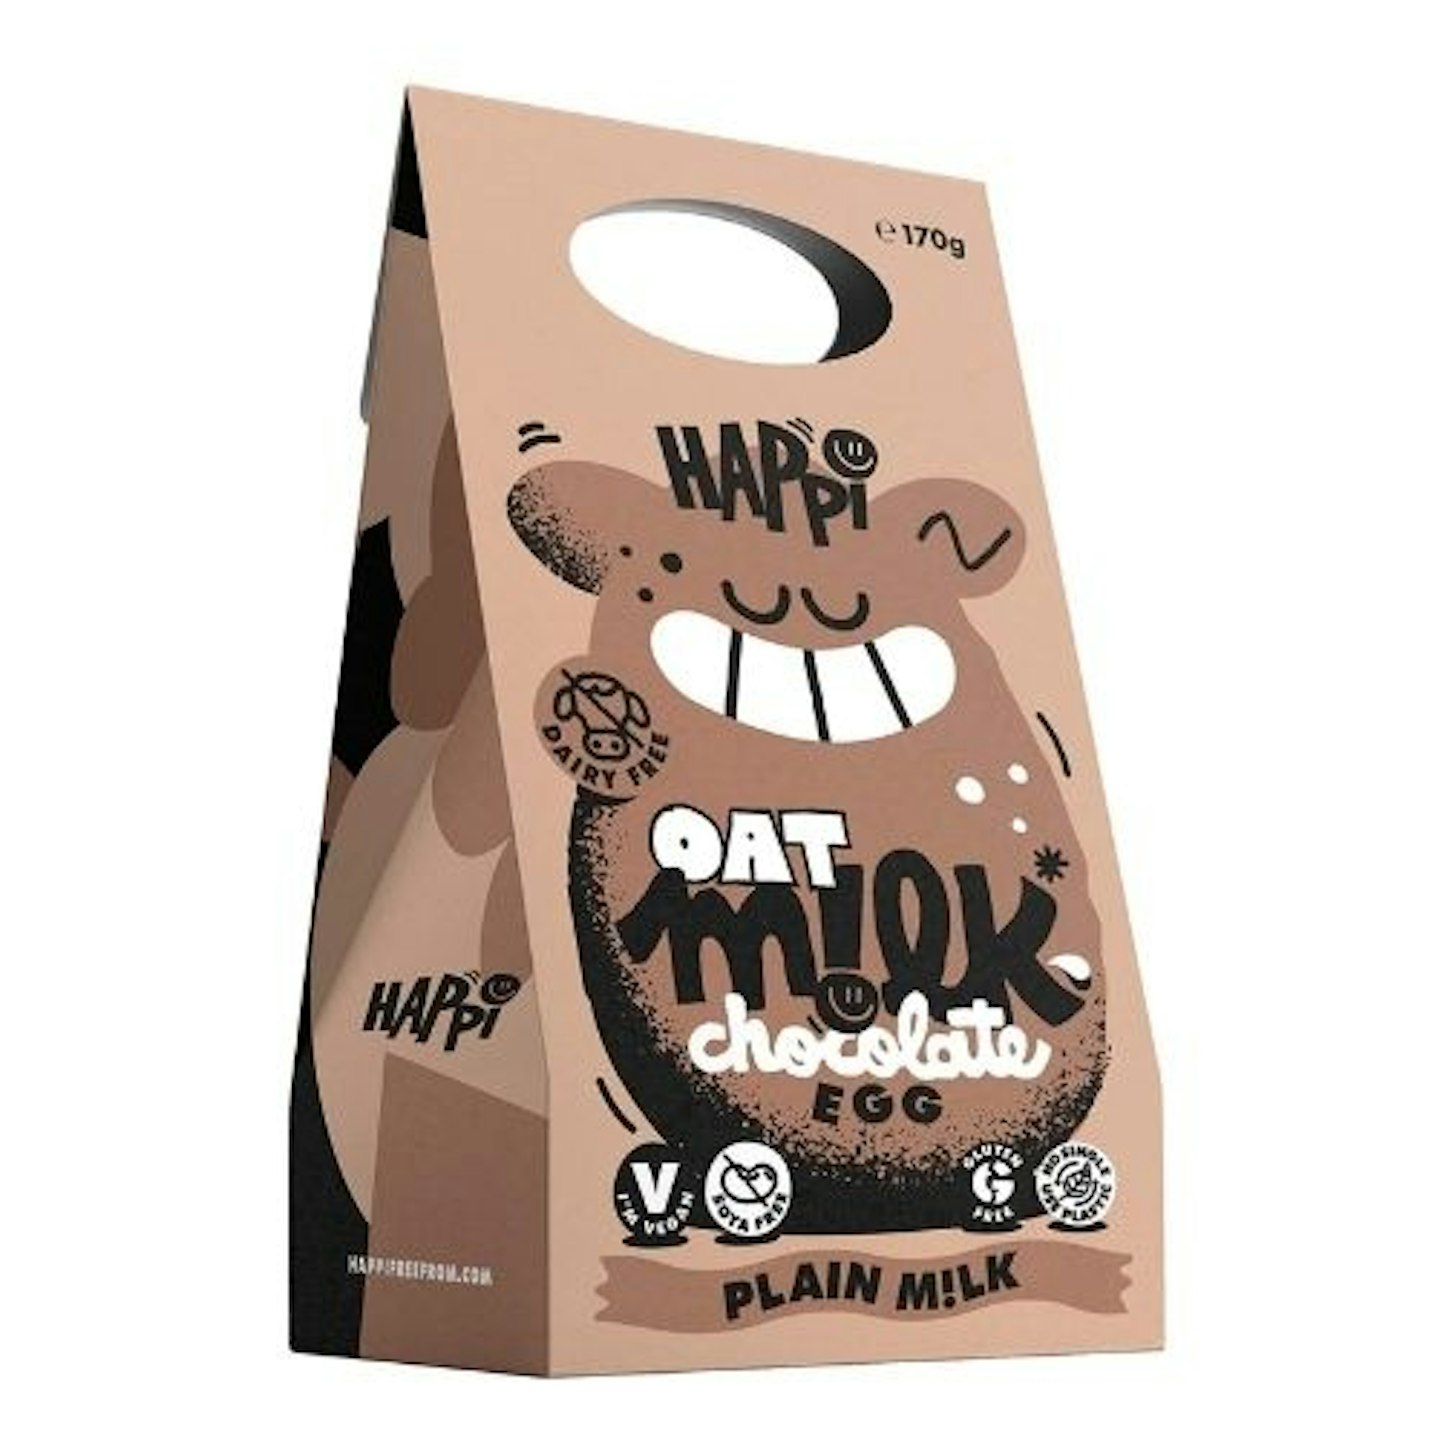  Happi Oat Milk Chocolate 170g Free From Easter Egg